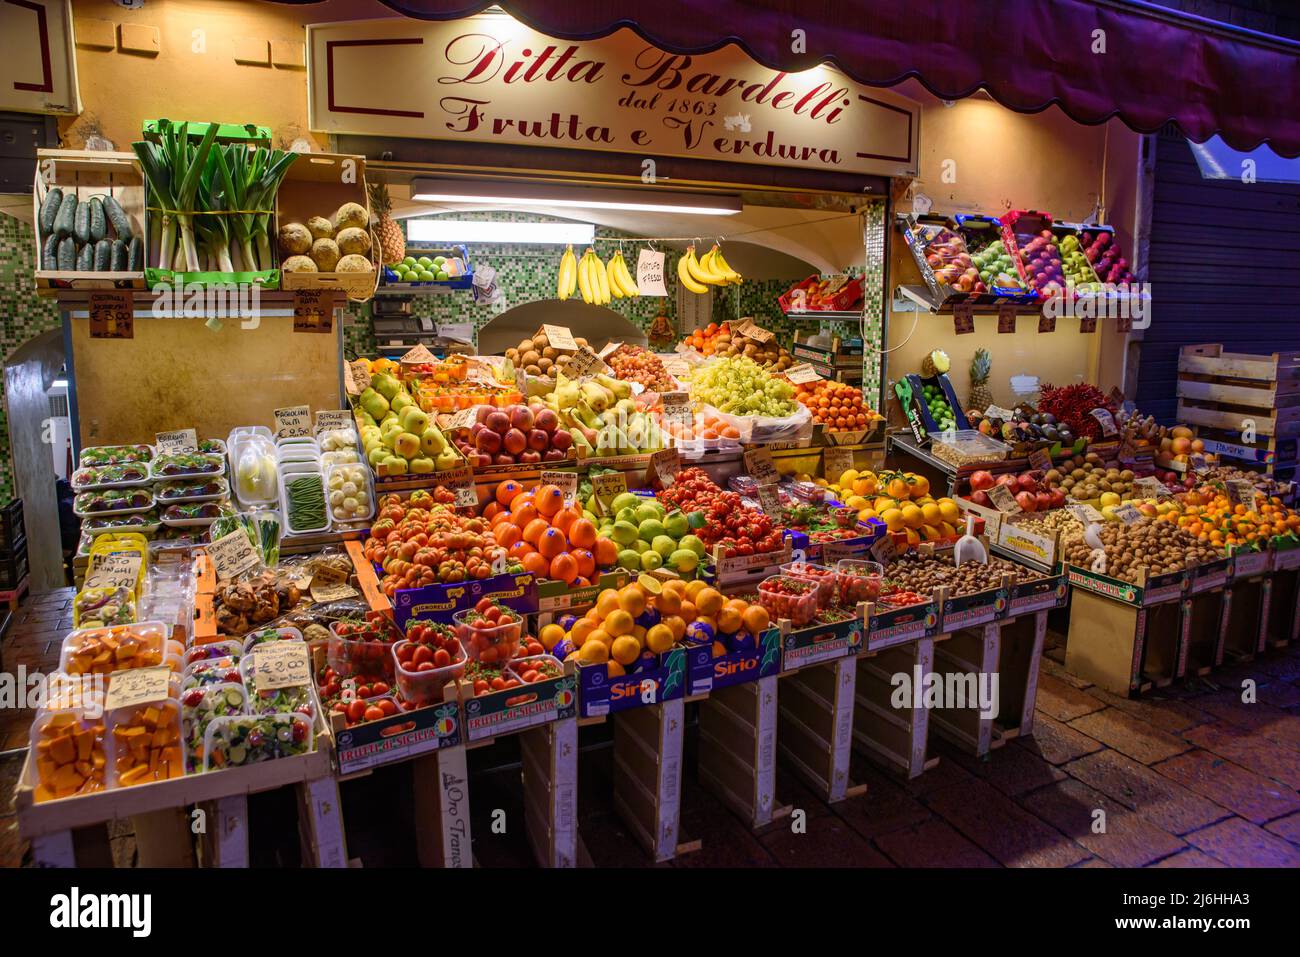 Vegetable and fruit stall in Bologna, Italy Stock Photo